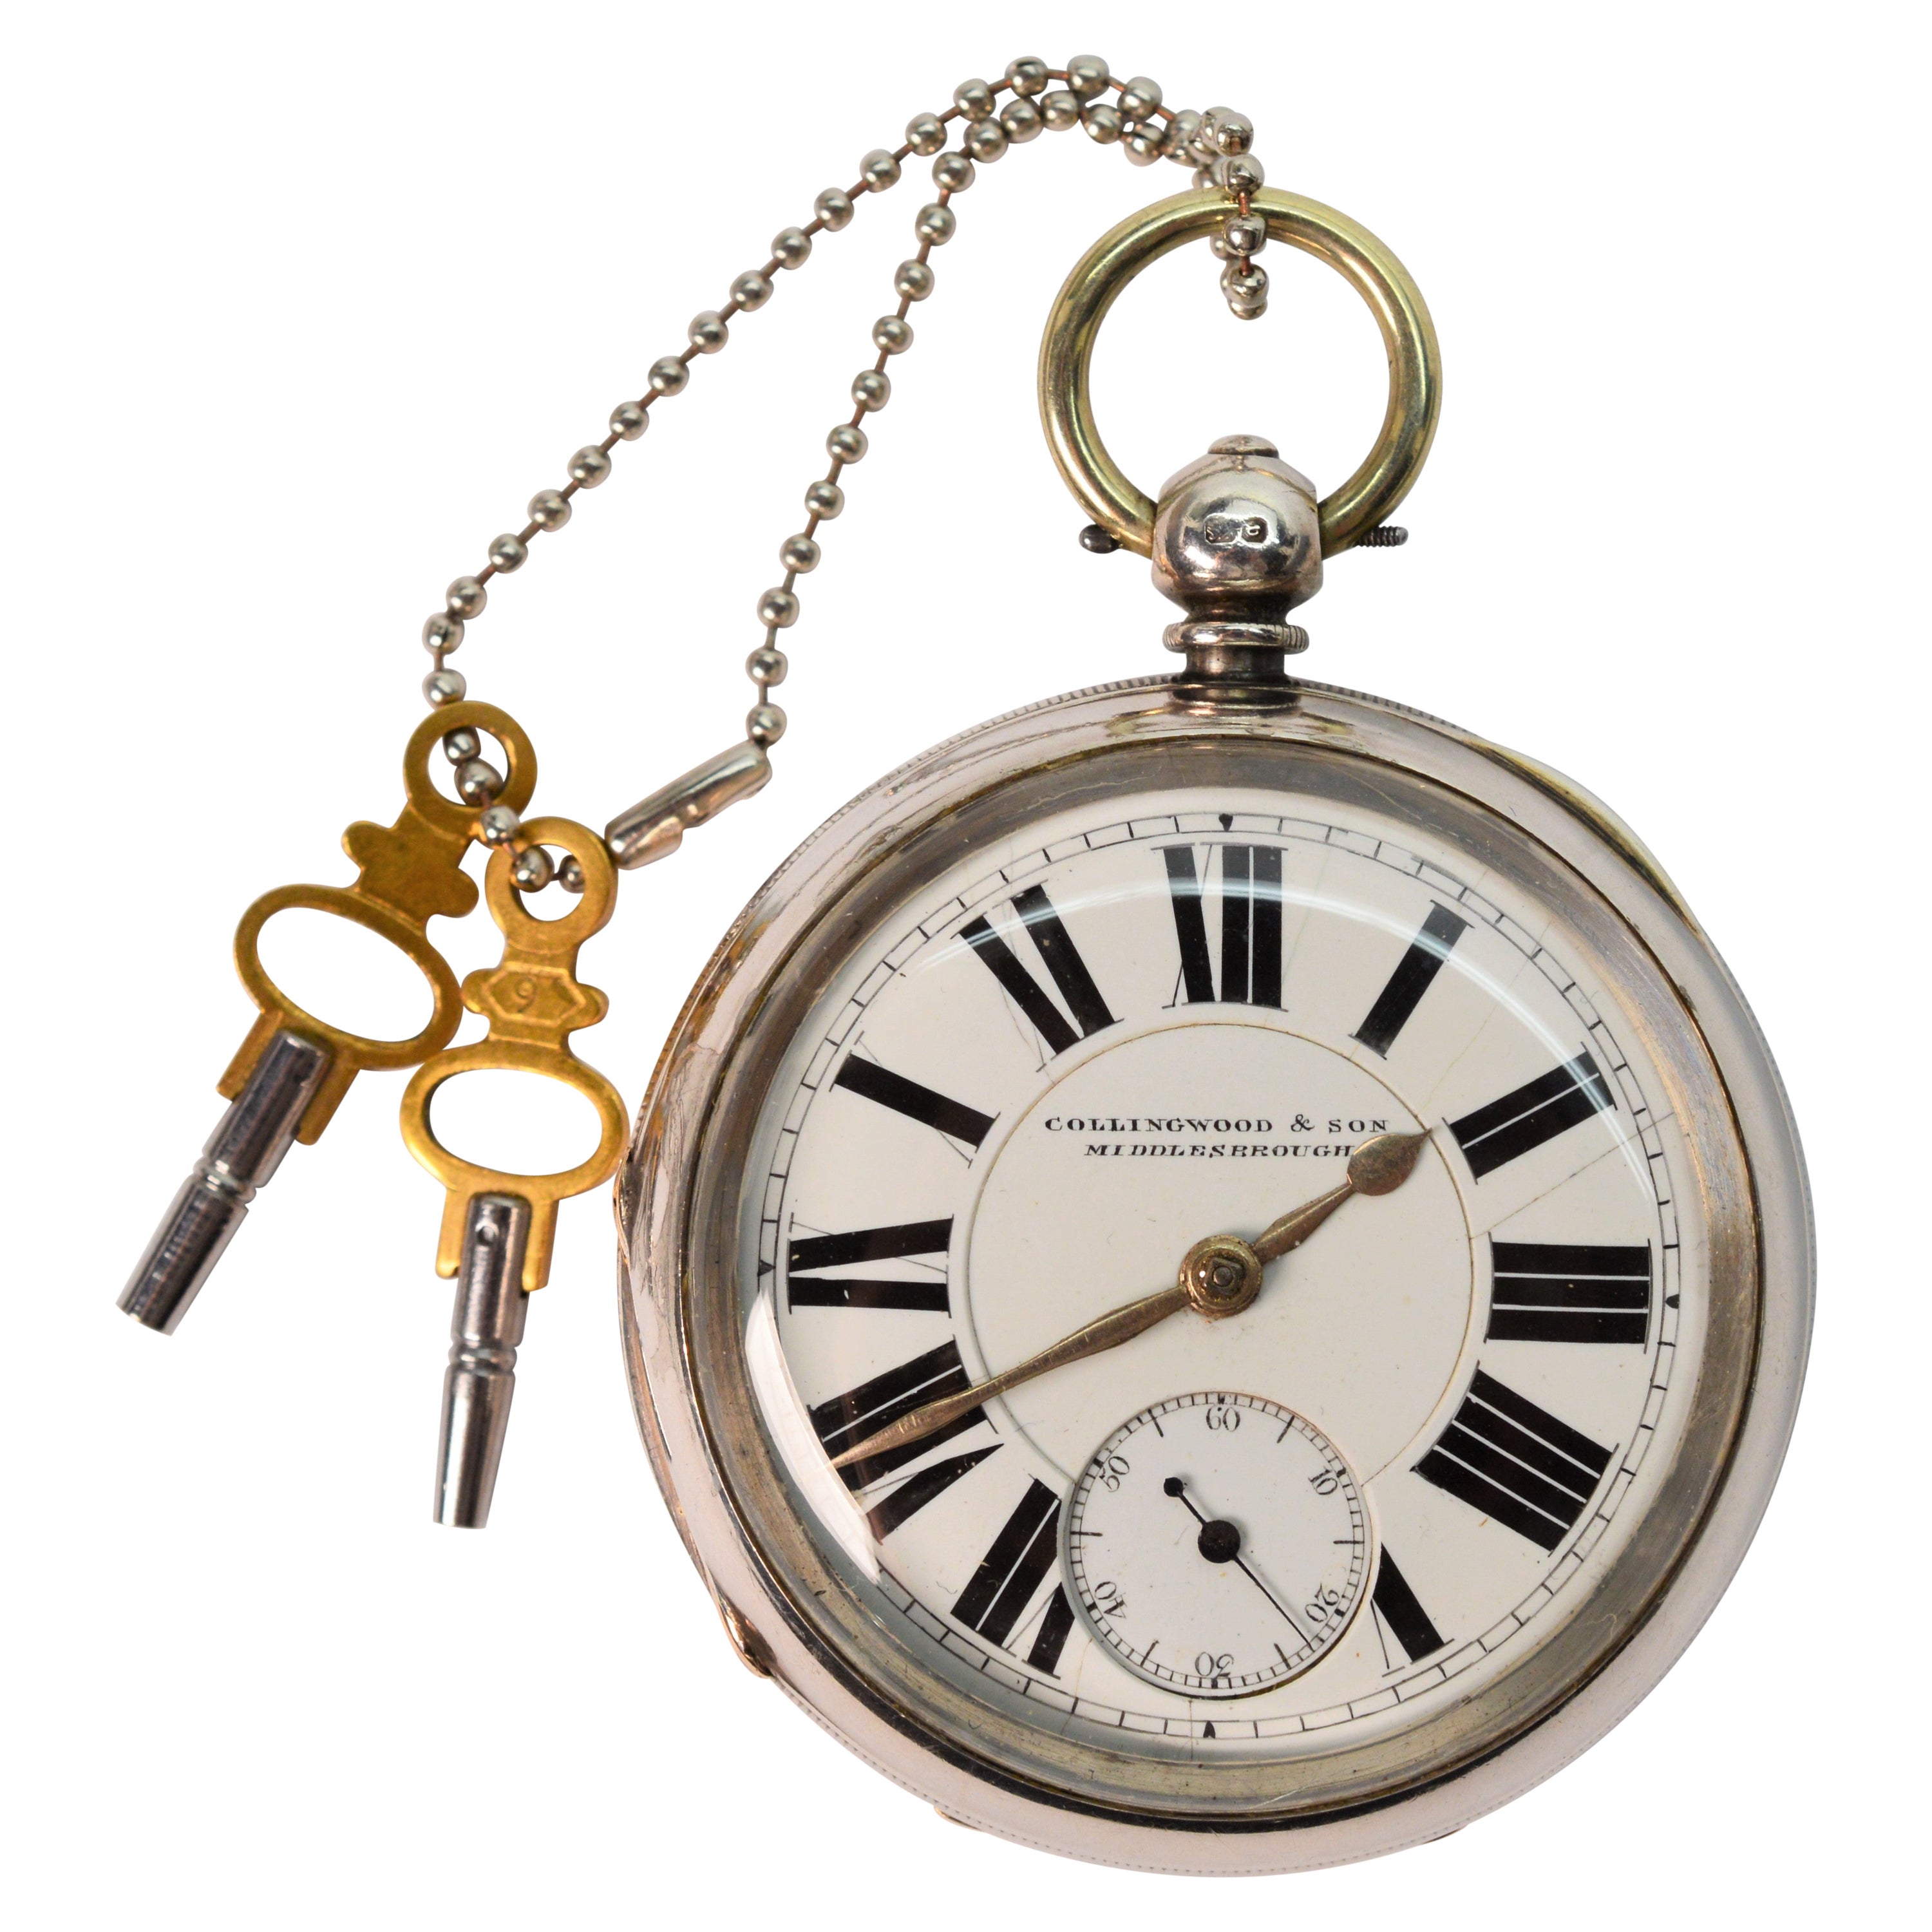 Collinwood & Sons Sterling Silver Railroad Pocket Watch